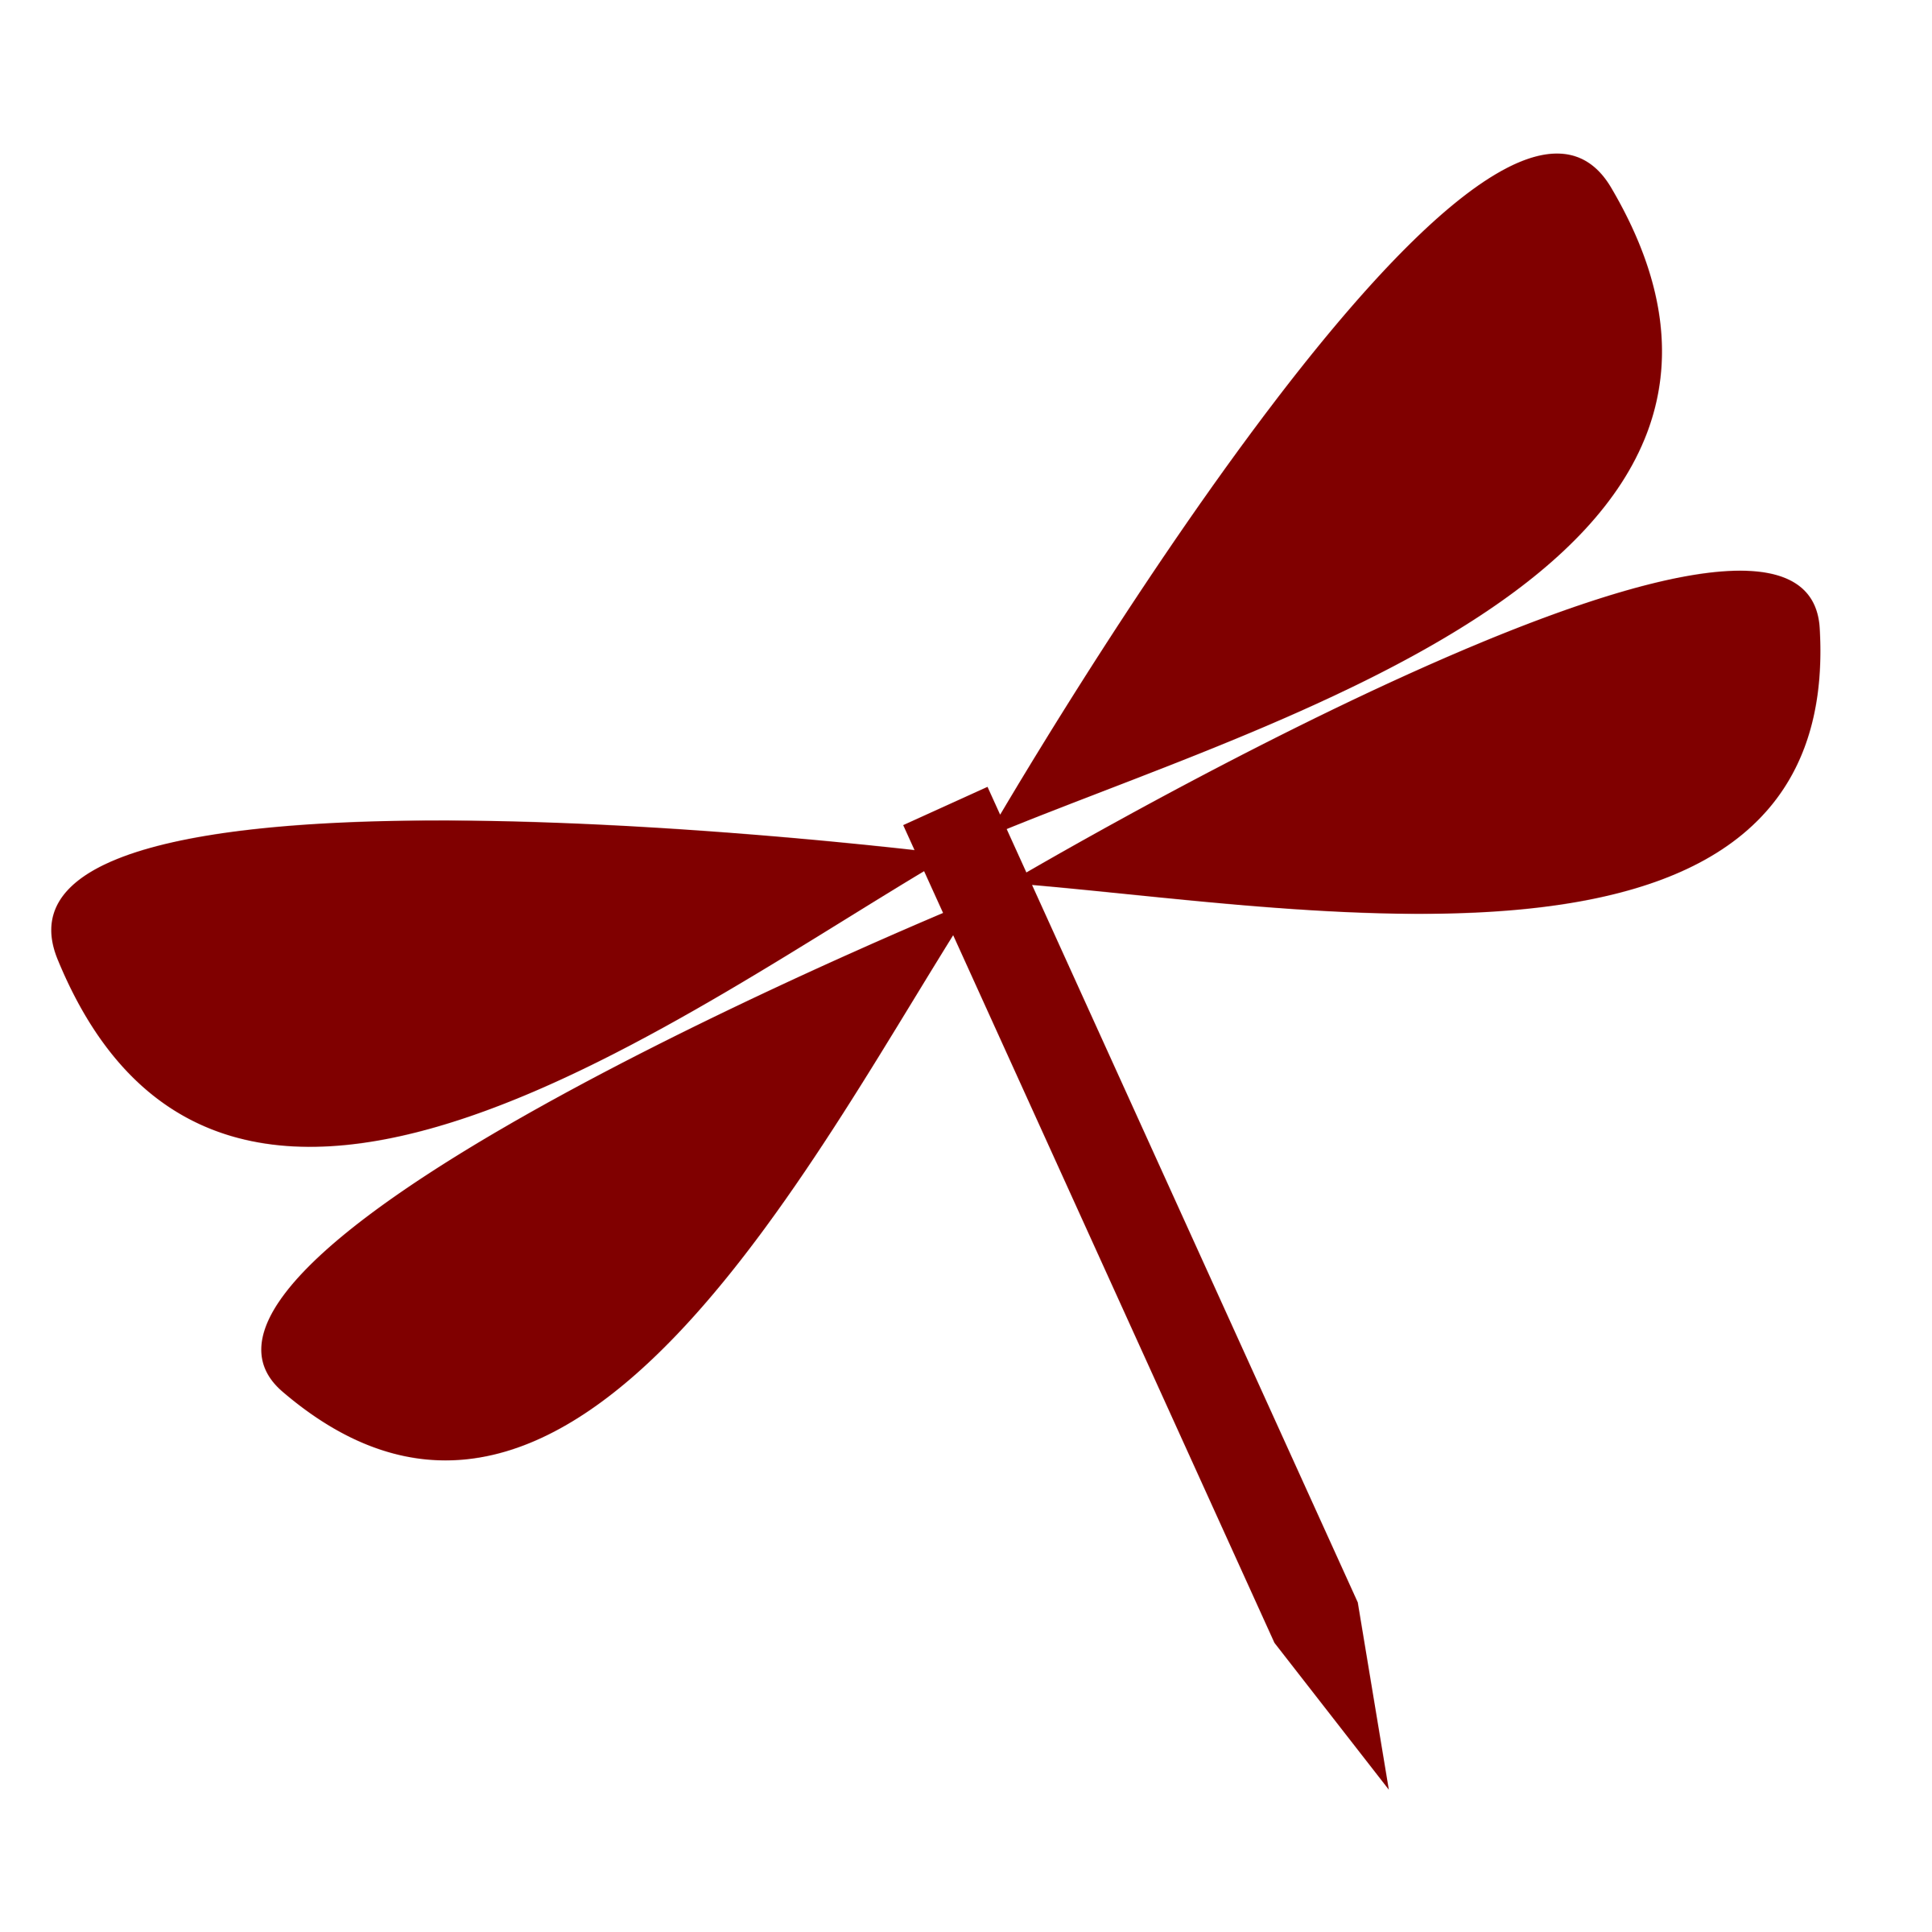 dragonfly clipart red dragonfly